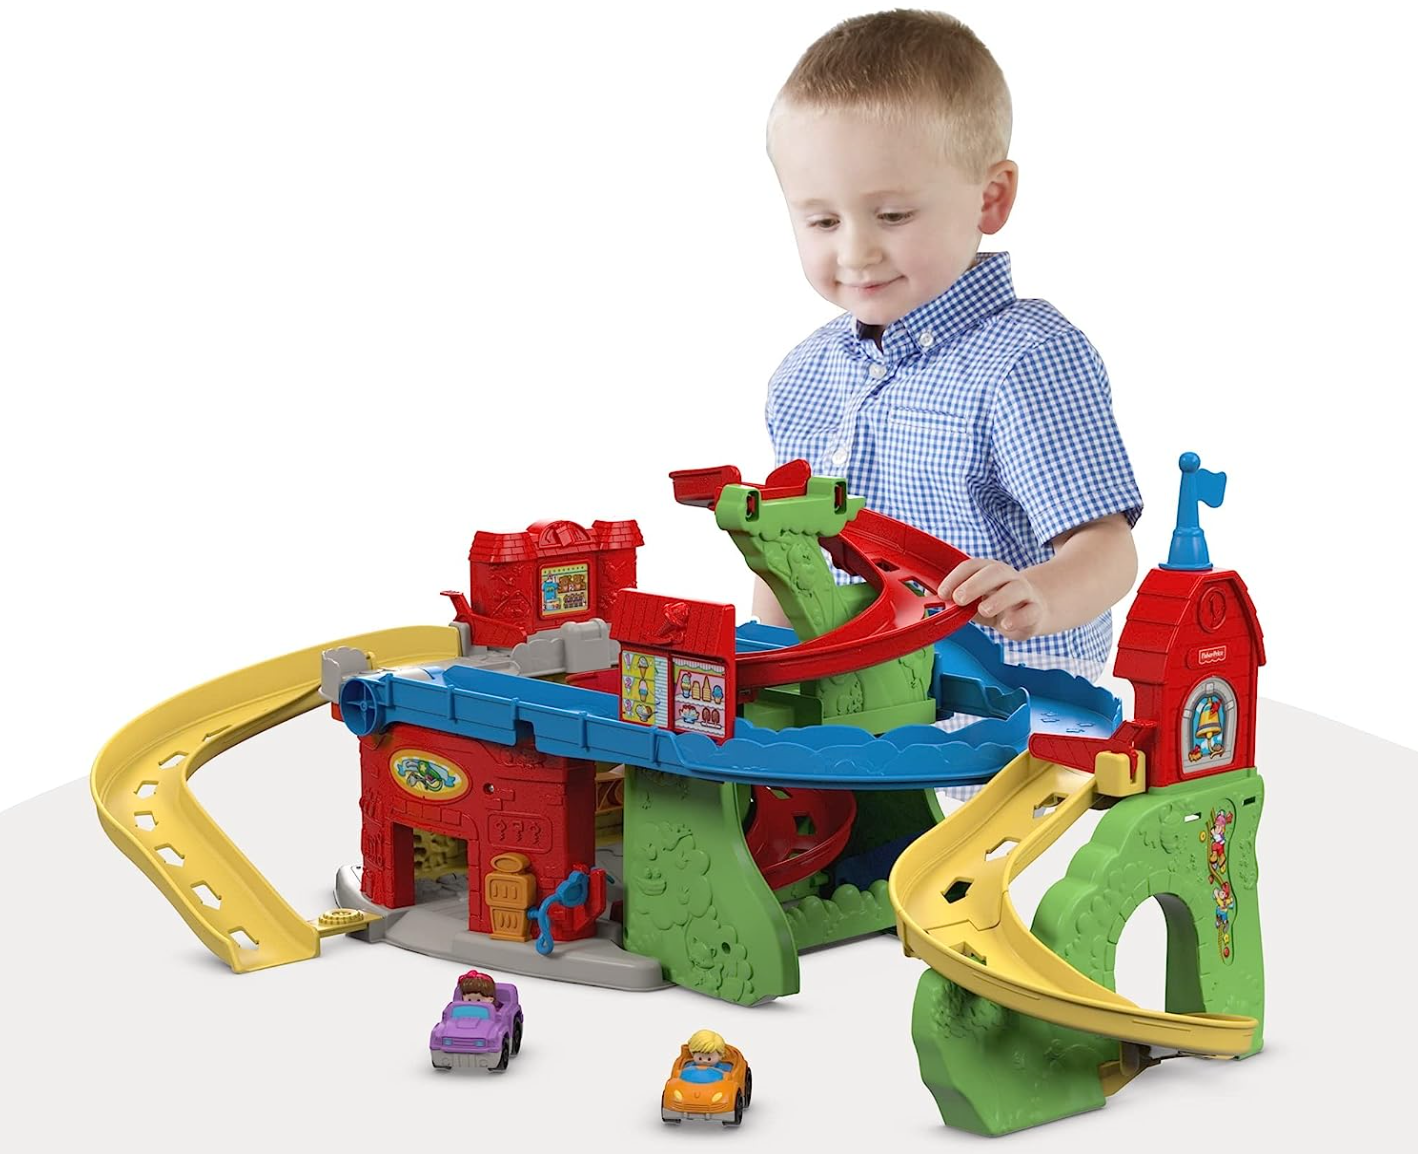 Fisher-Price Little People Toddler Race Track Playset Sit ‘n Stand Skyway, 34+ Inches Tall, 2 Toy Cars for Ages 18+ Months